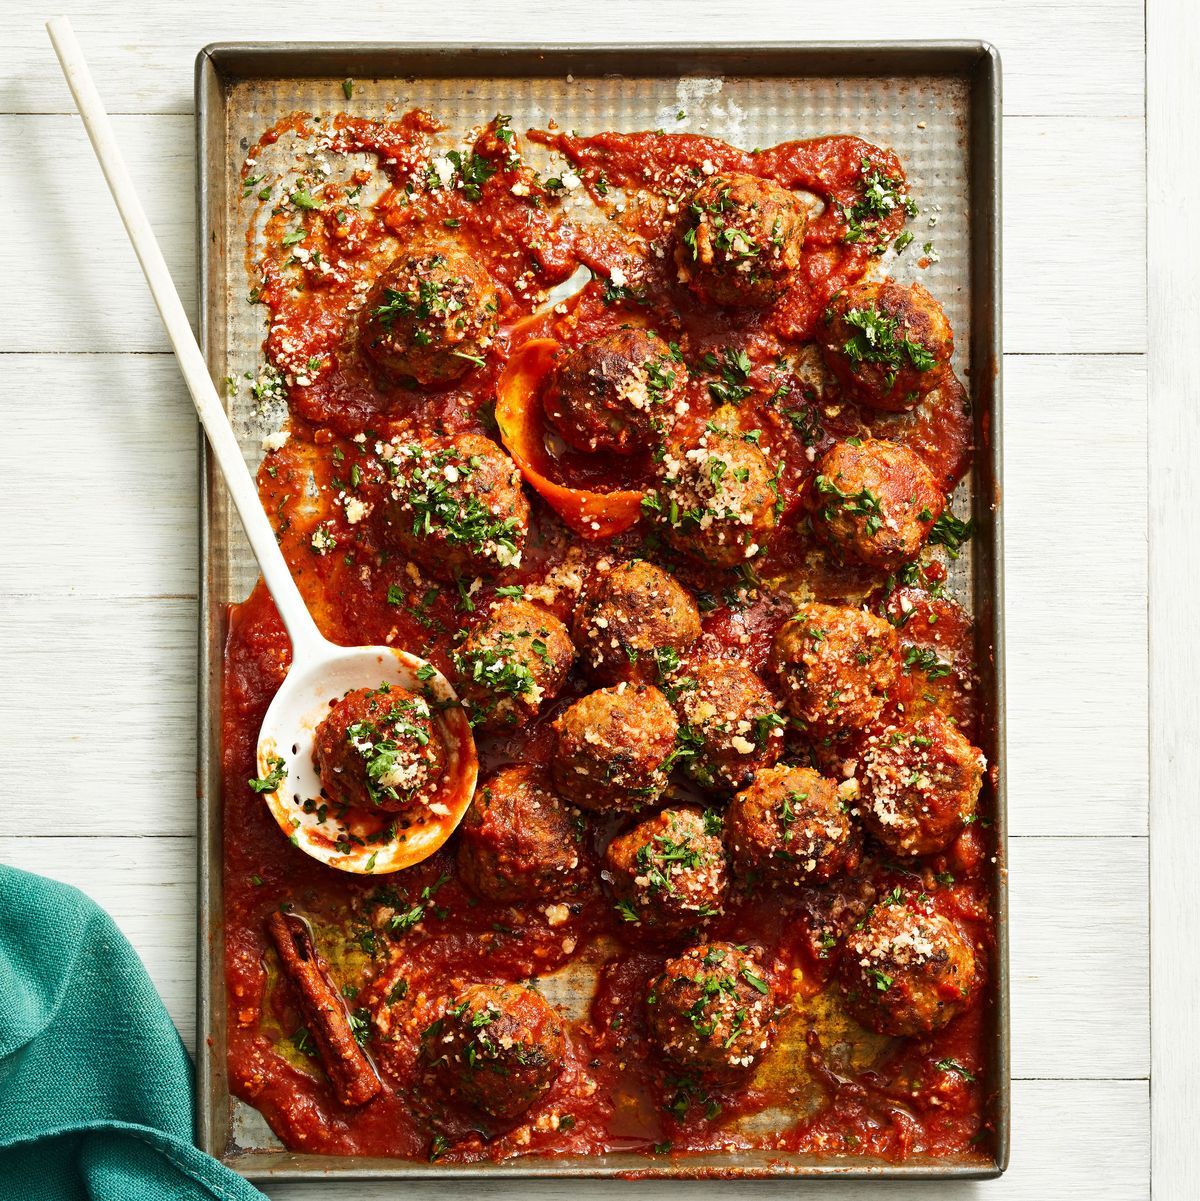 https://hips.hearstapps.com/hmg-prod/images/mothers-day-dinner-ideas-saucy-sausage-meatballs-64231b7a46843.jpg